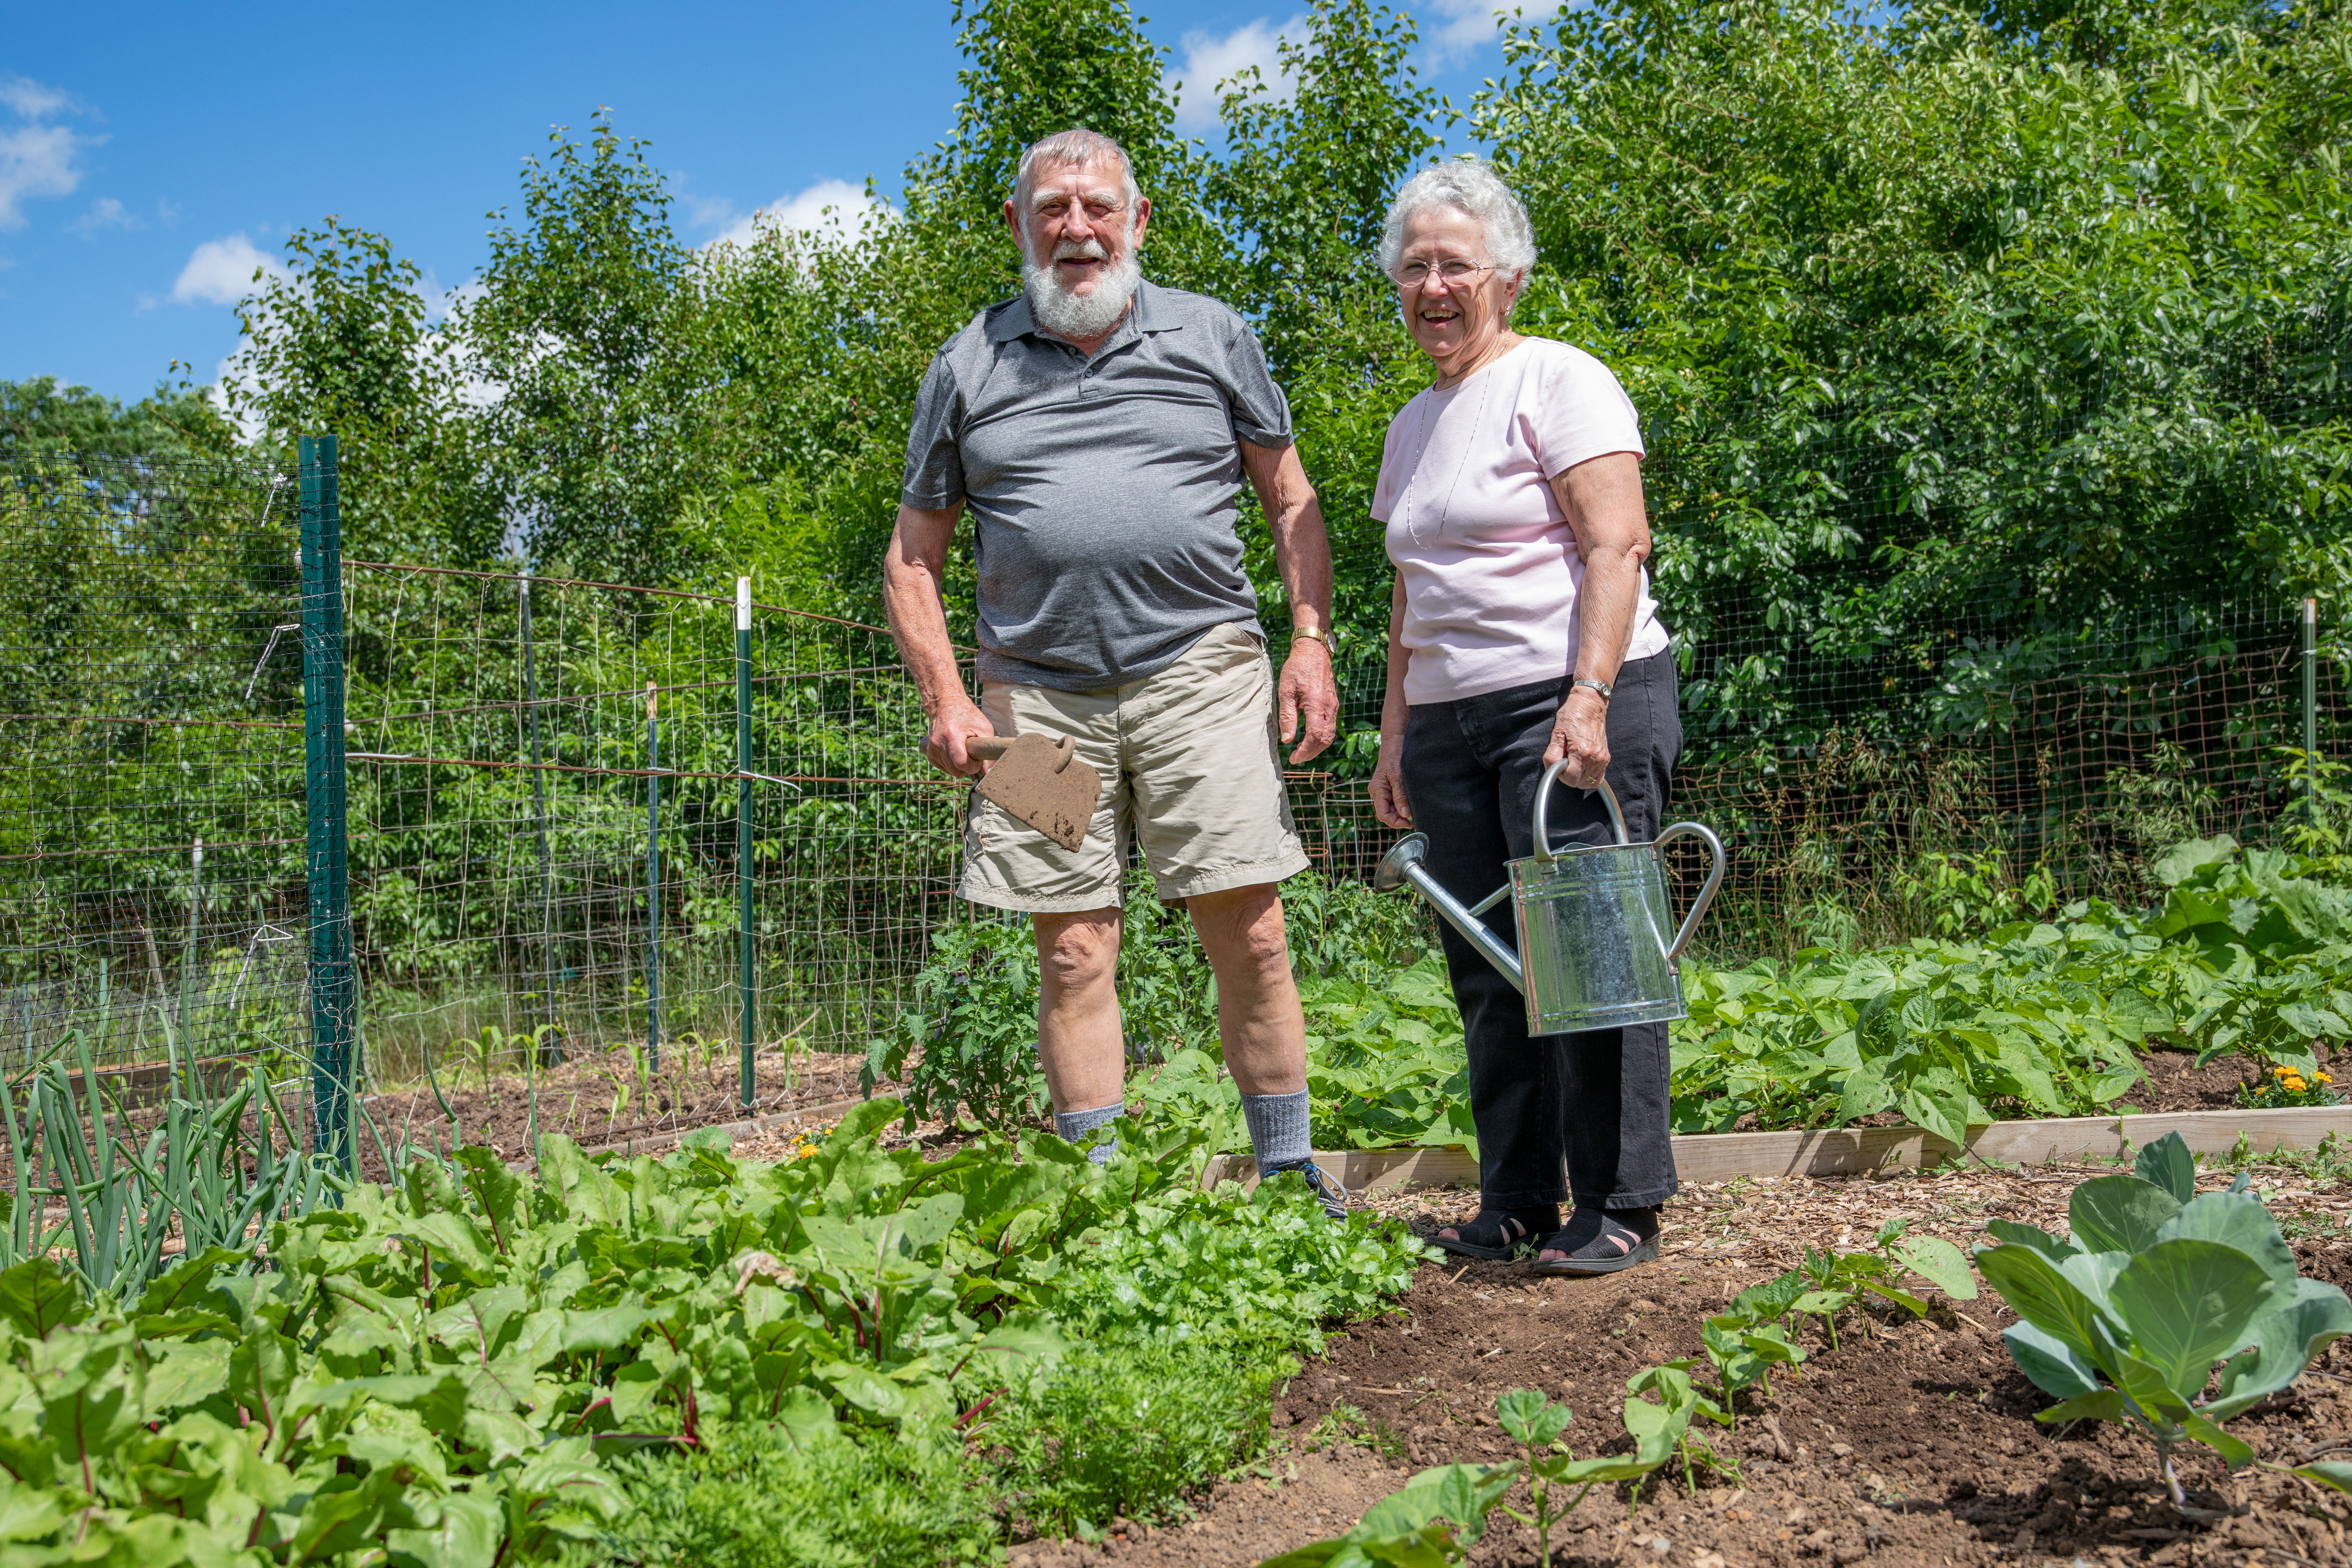 Community gardens within walking distance